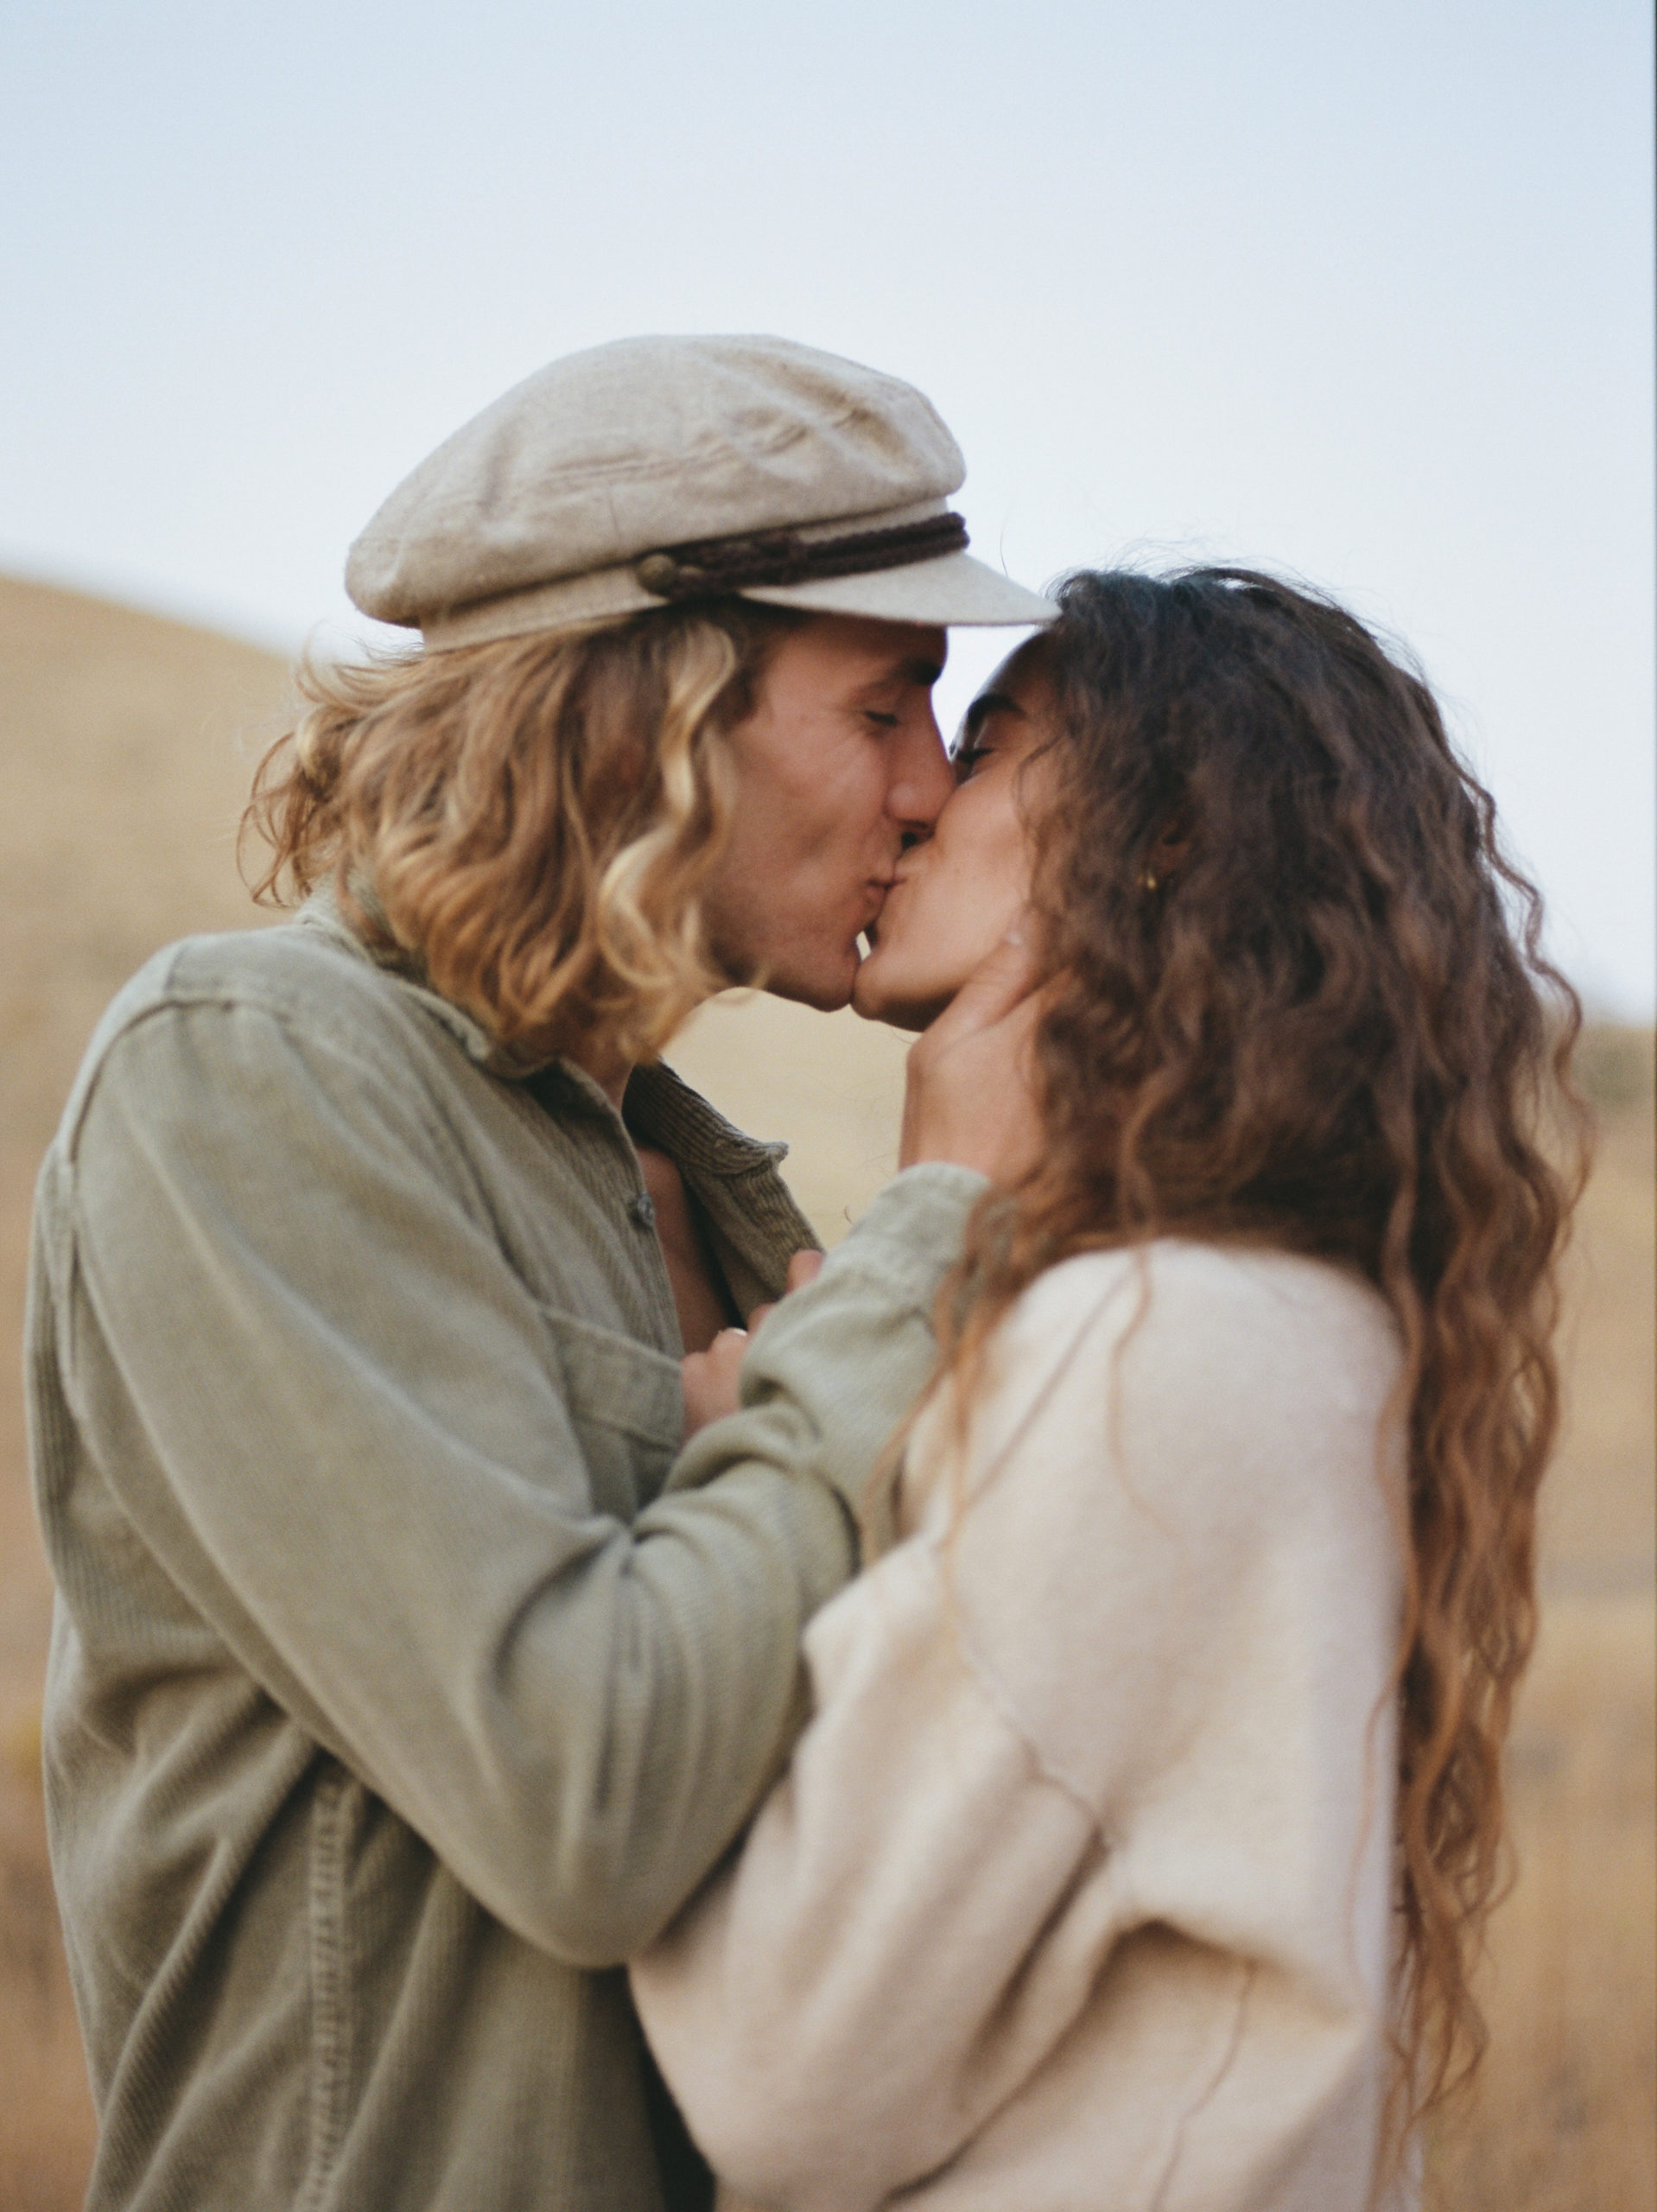 A female with brunette long hair and a male with short blonde hair couple posing for their engagement photos in their Utah location.